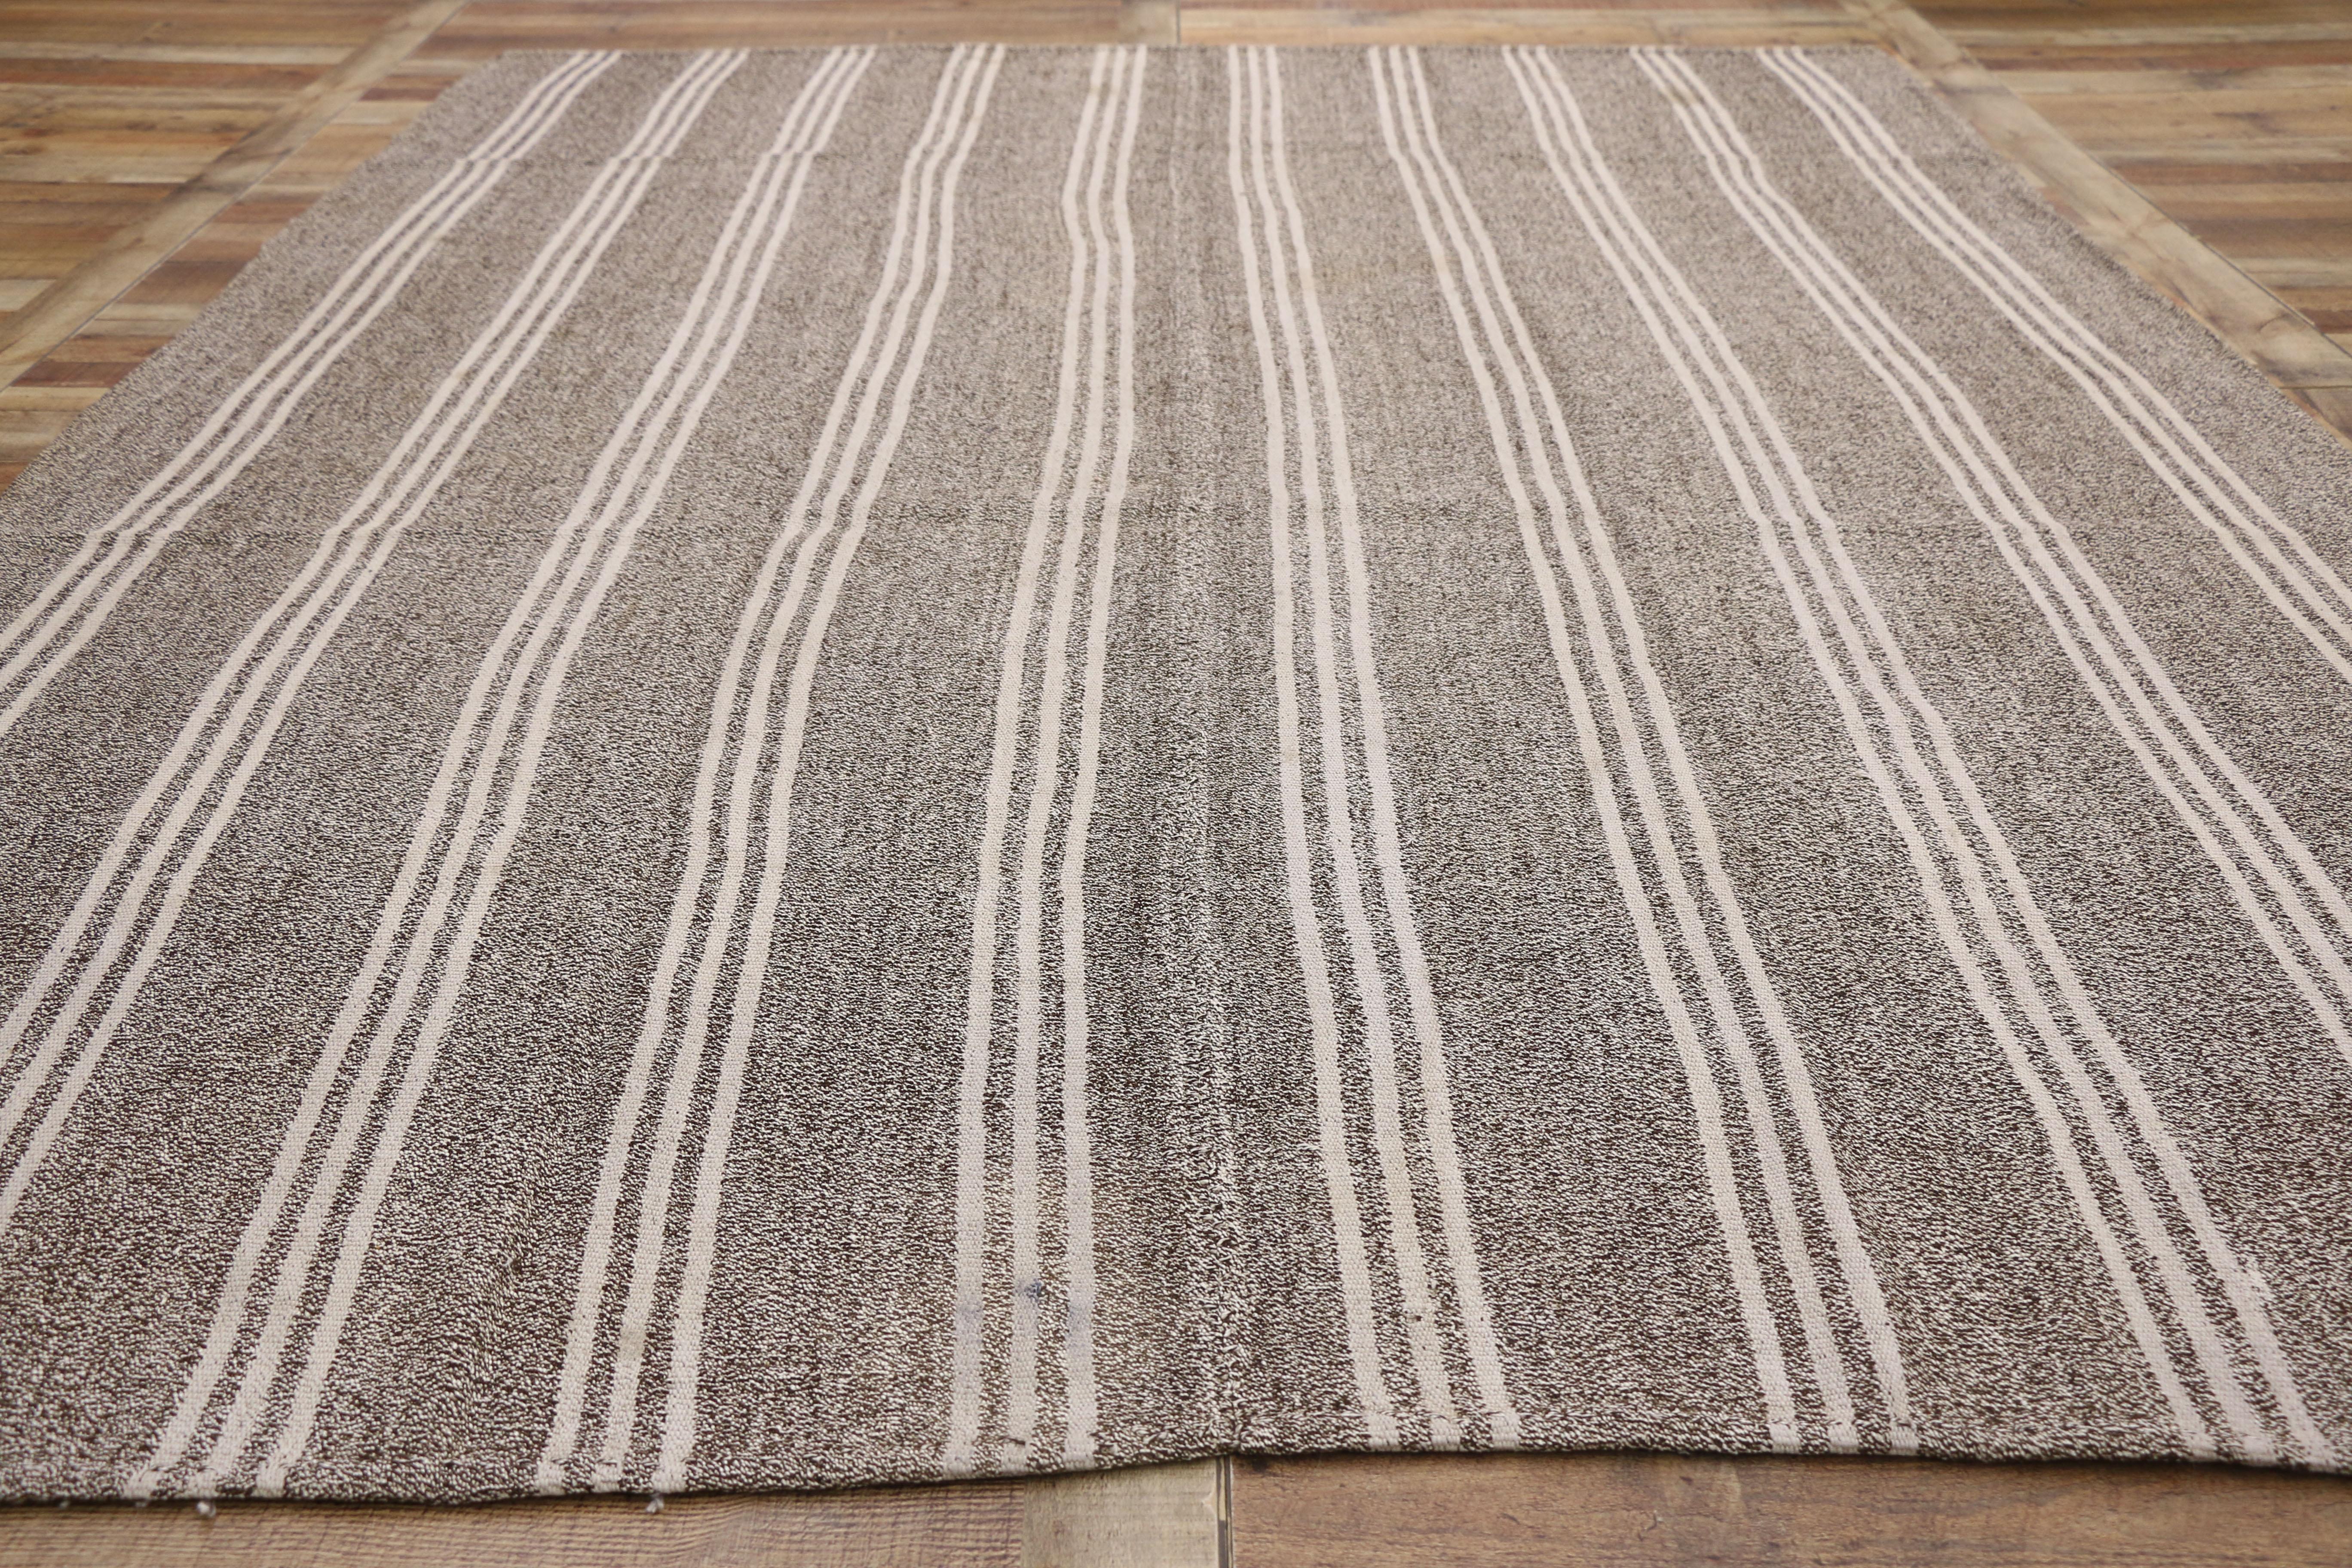 Vintage Turkish Striped Kilim Area Rug with Modern Industrial Style For Sale 1